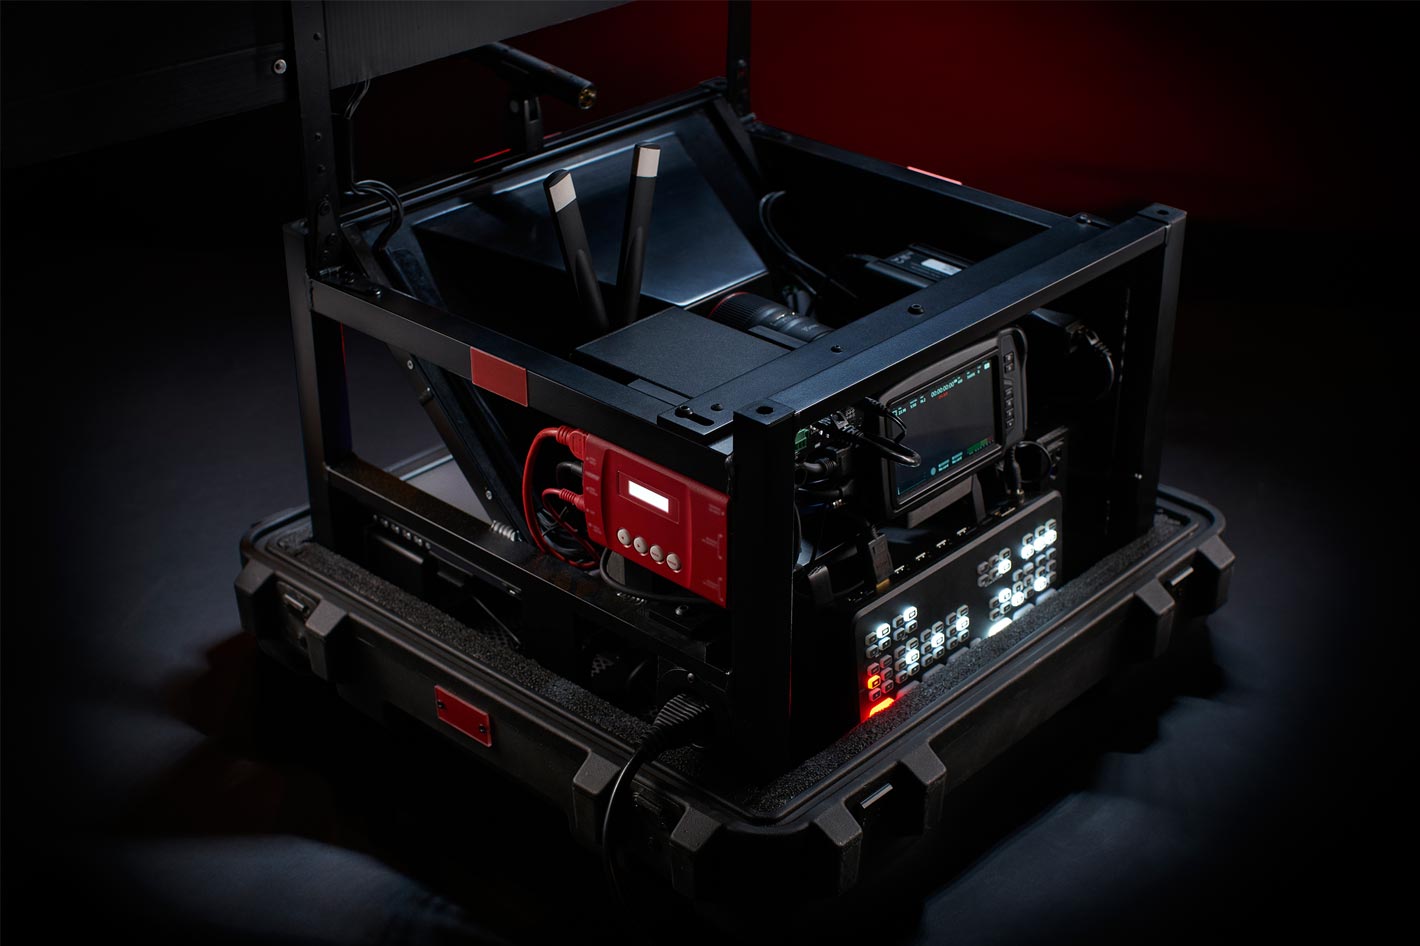 Crew in a Box: remote video production solution for the pandemic